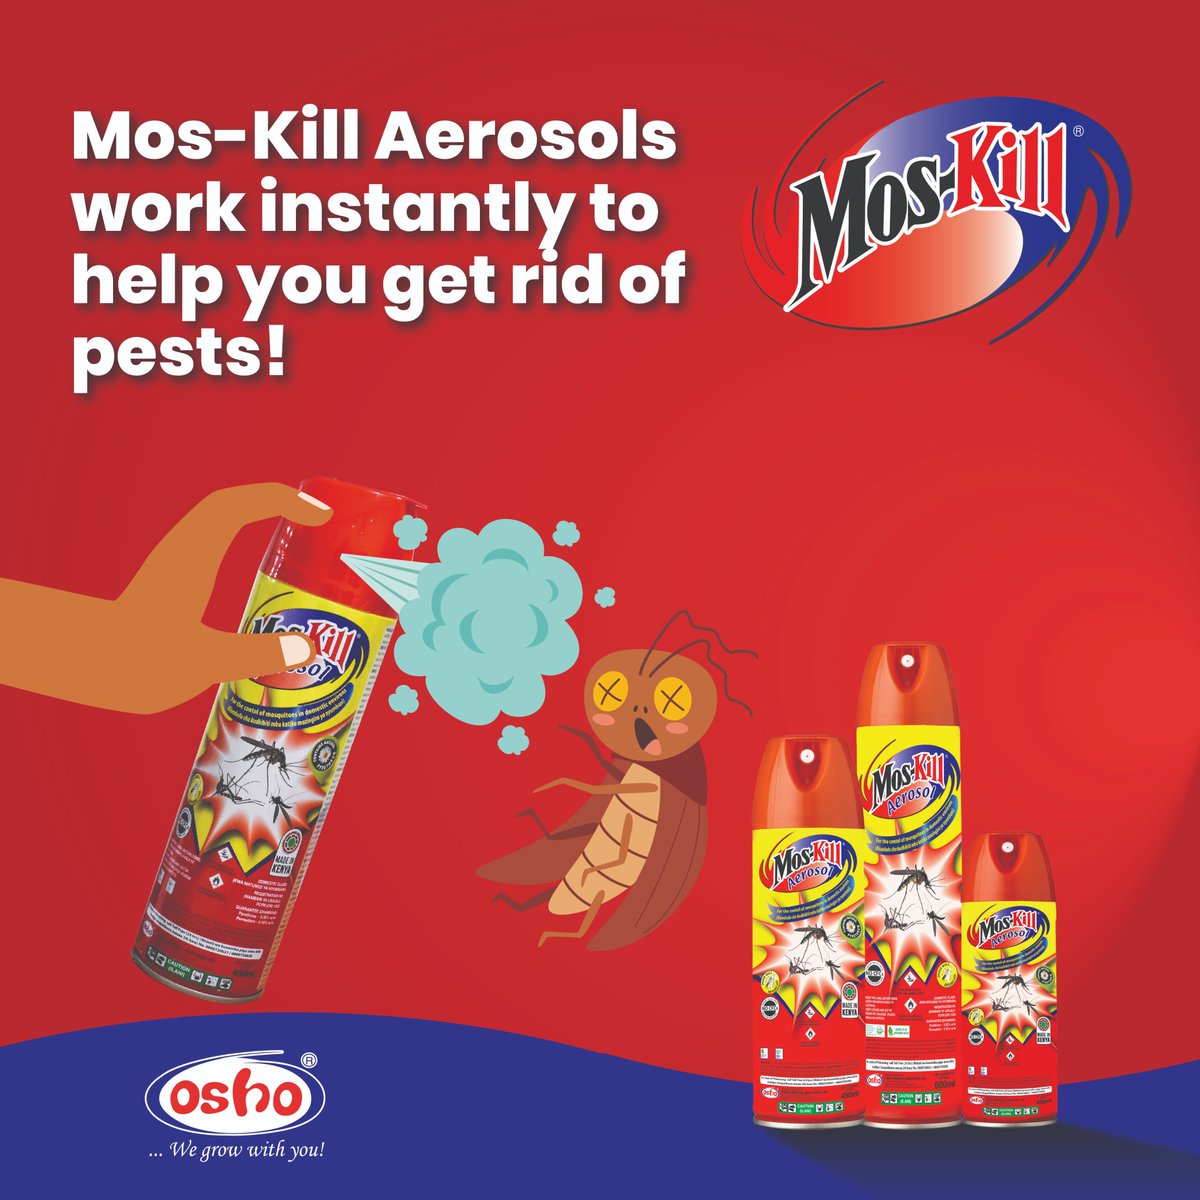 Mos-kill Aerosols work instantly to help you manage household pest problems. It is also affordable with long-lasting effects and available in all leading supermarkets. Get yours today!